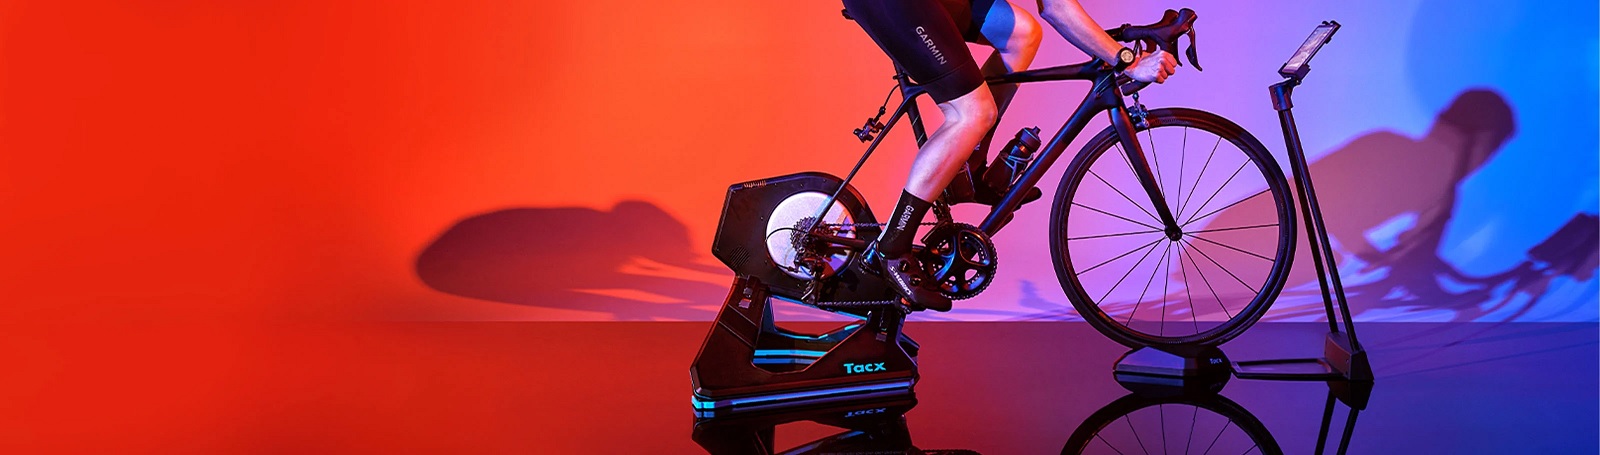 catalog/Products/Tacx/Tacx NEO 2T/neo 2t.jpg